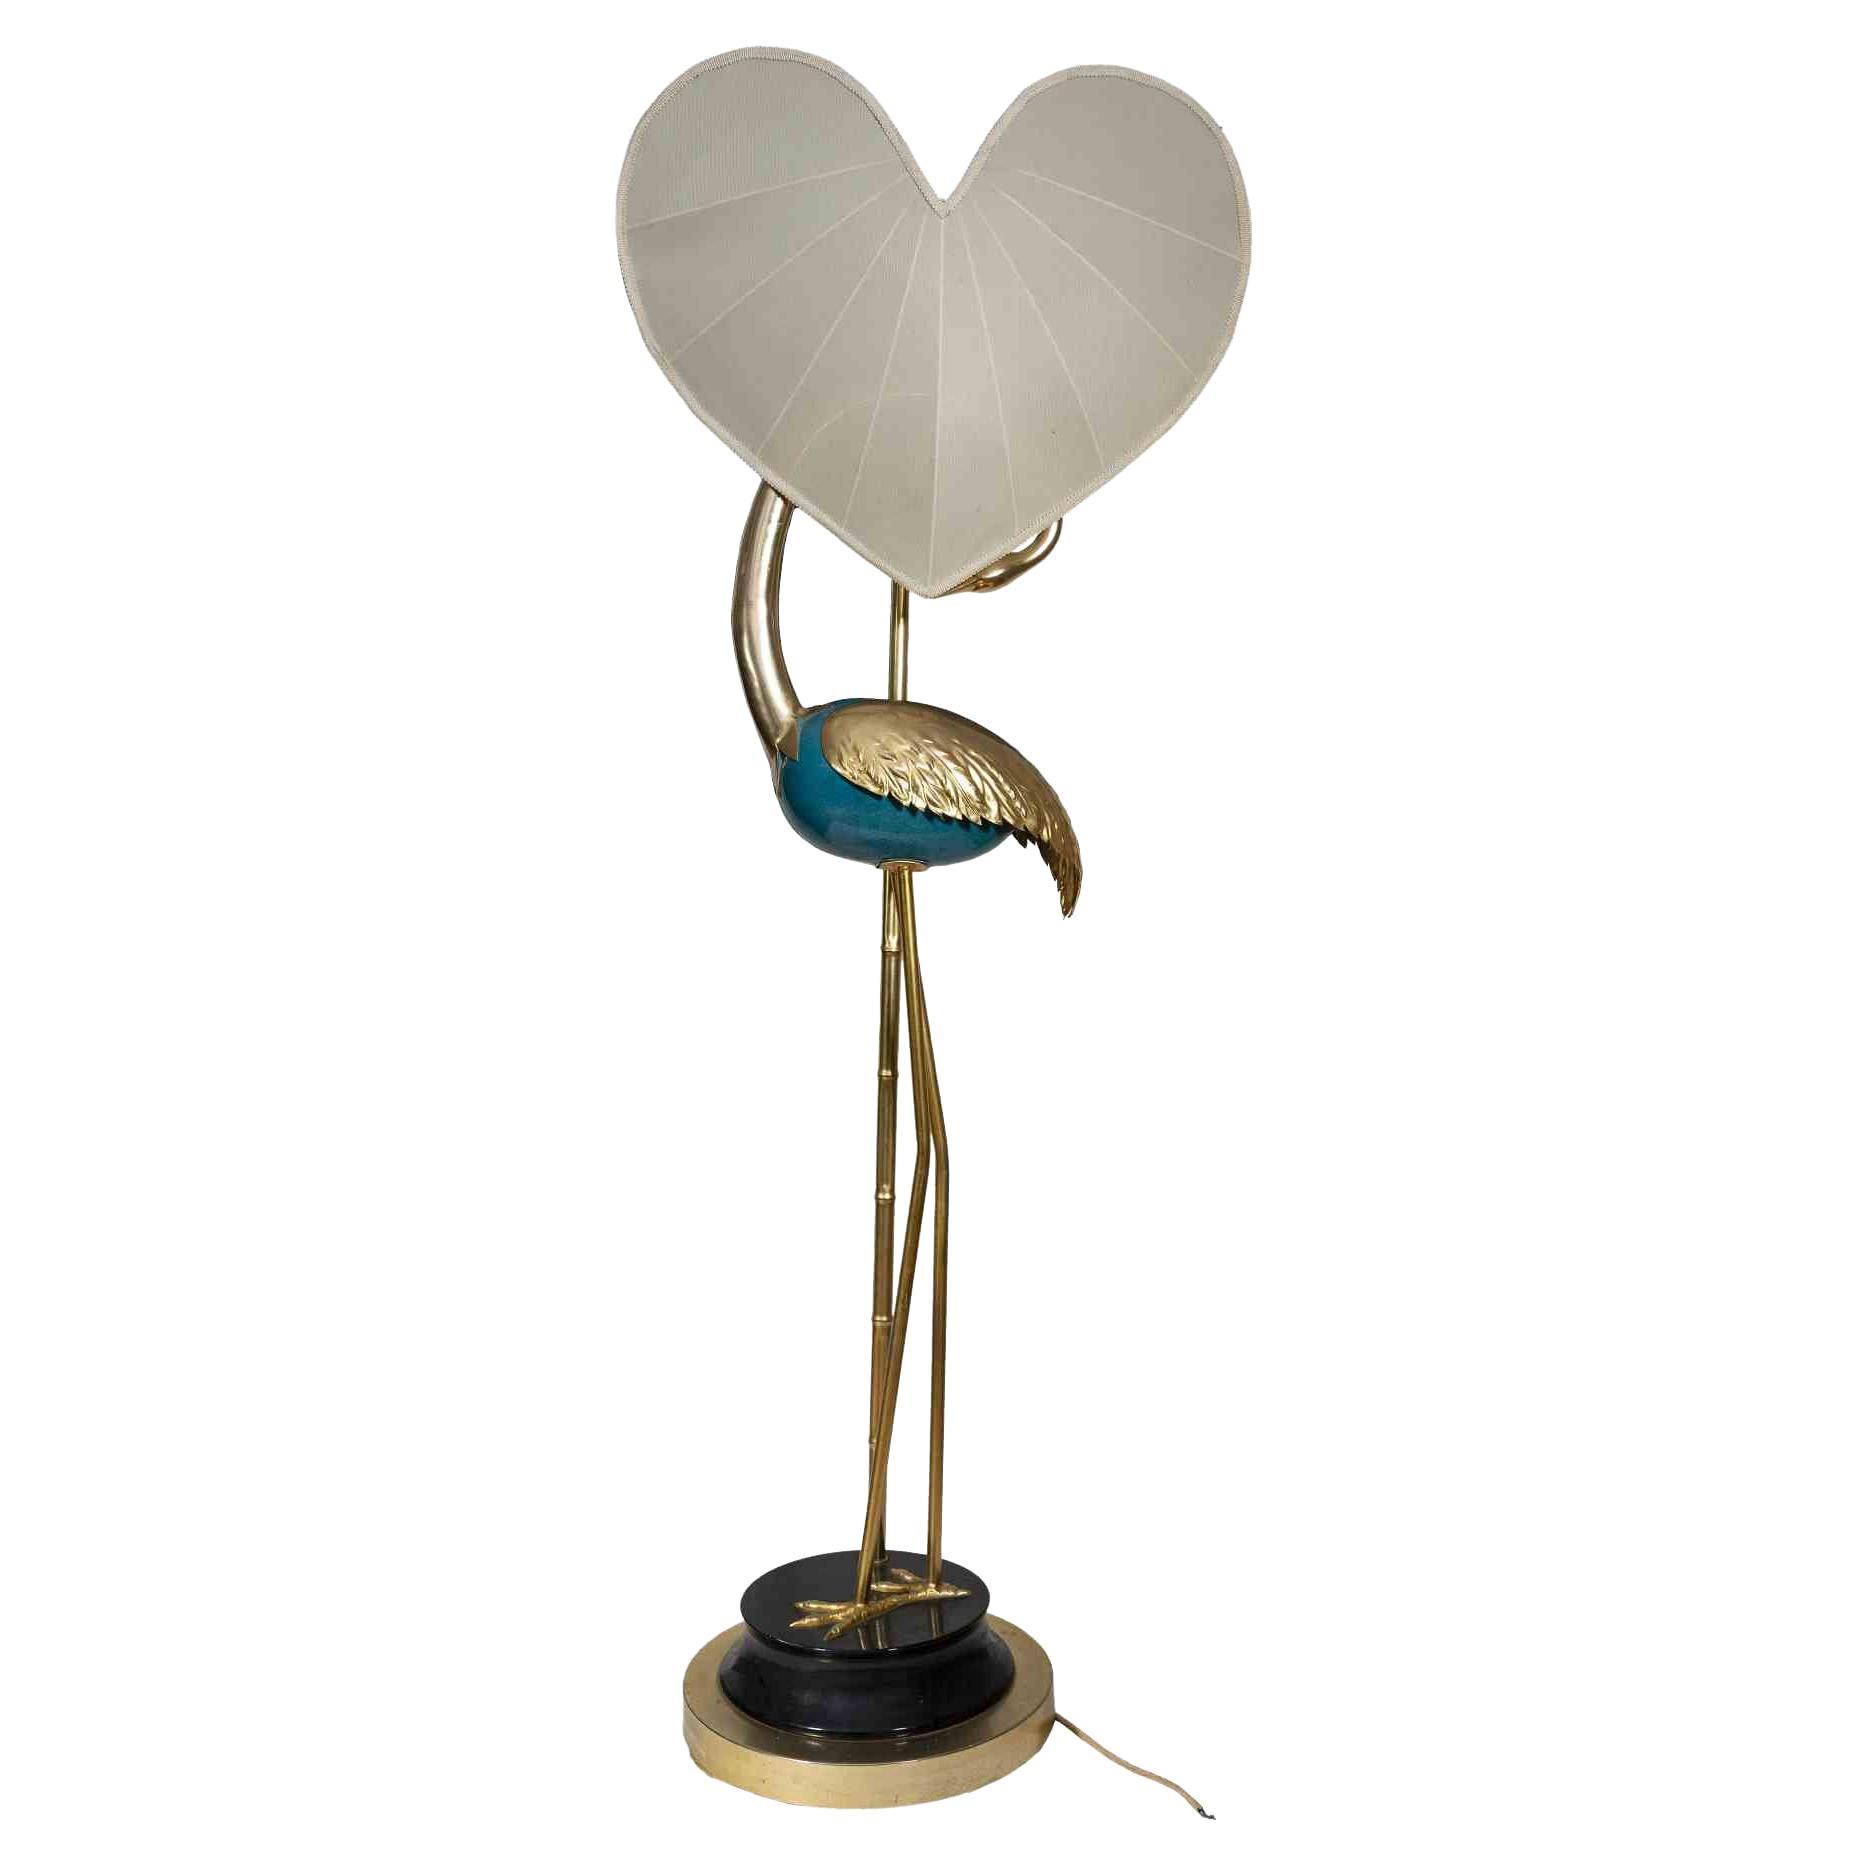 Vintage Flamingo Turquoise and Gold Lamp Lamp by Antonio Pavia, 1970s For Sale